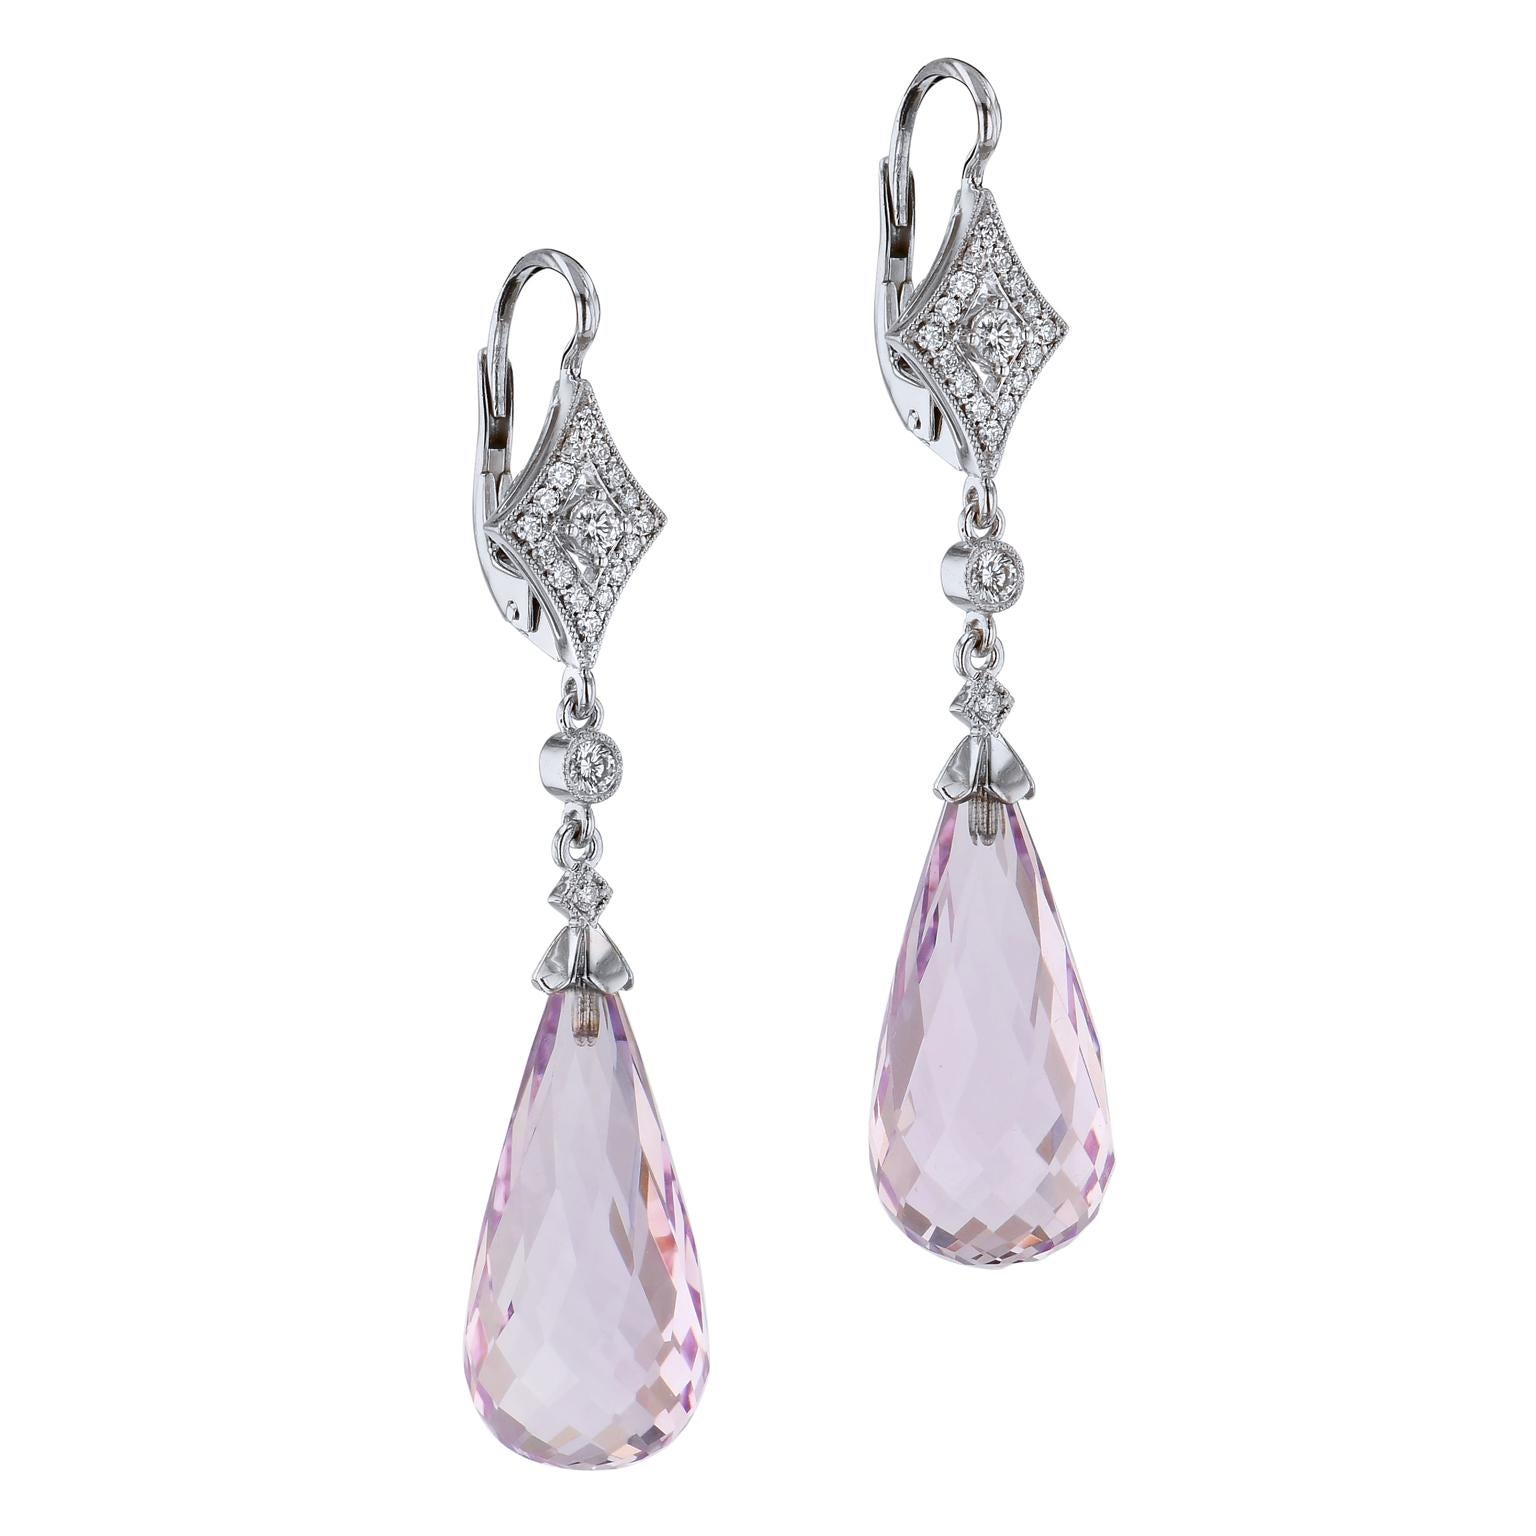 23.80 carats of Amethyst Briolette Cut Stones with Pave Diamonds in 18 karat White Gold Earrings

These stunning earrings are a handmade, one of a kind creation by H&H Jewels.  
They feature briolette cut 23.80 carats of Amethyst stones that dangle